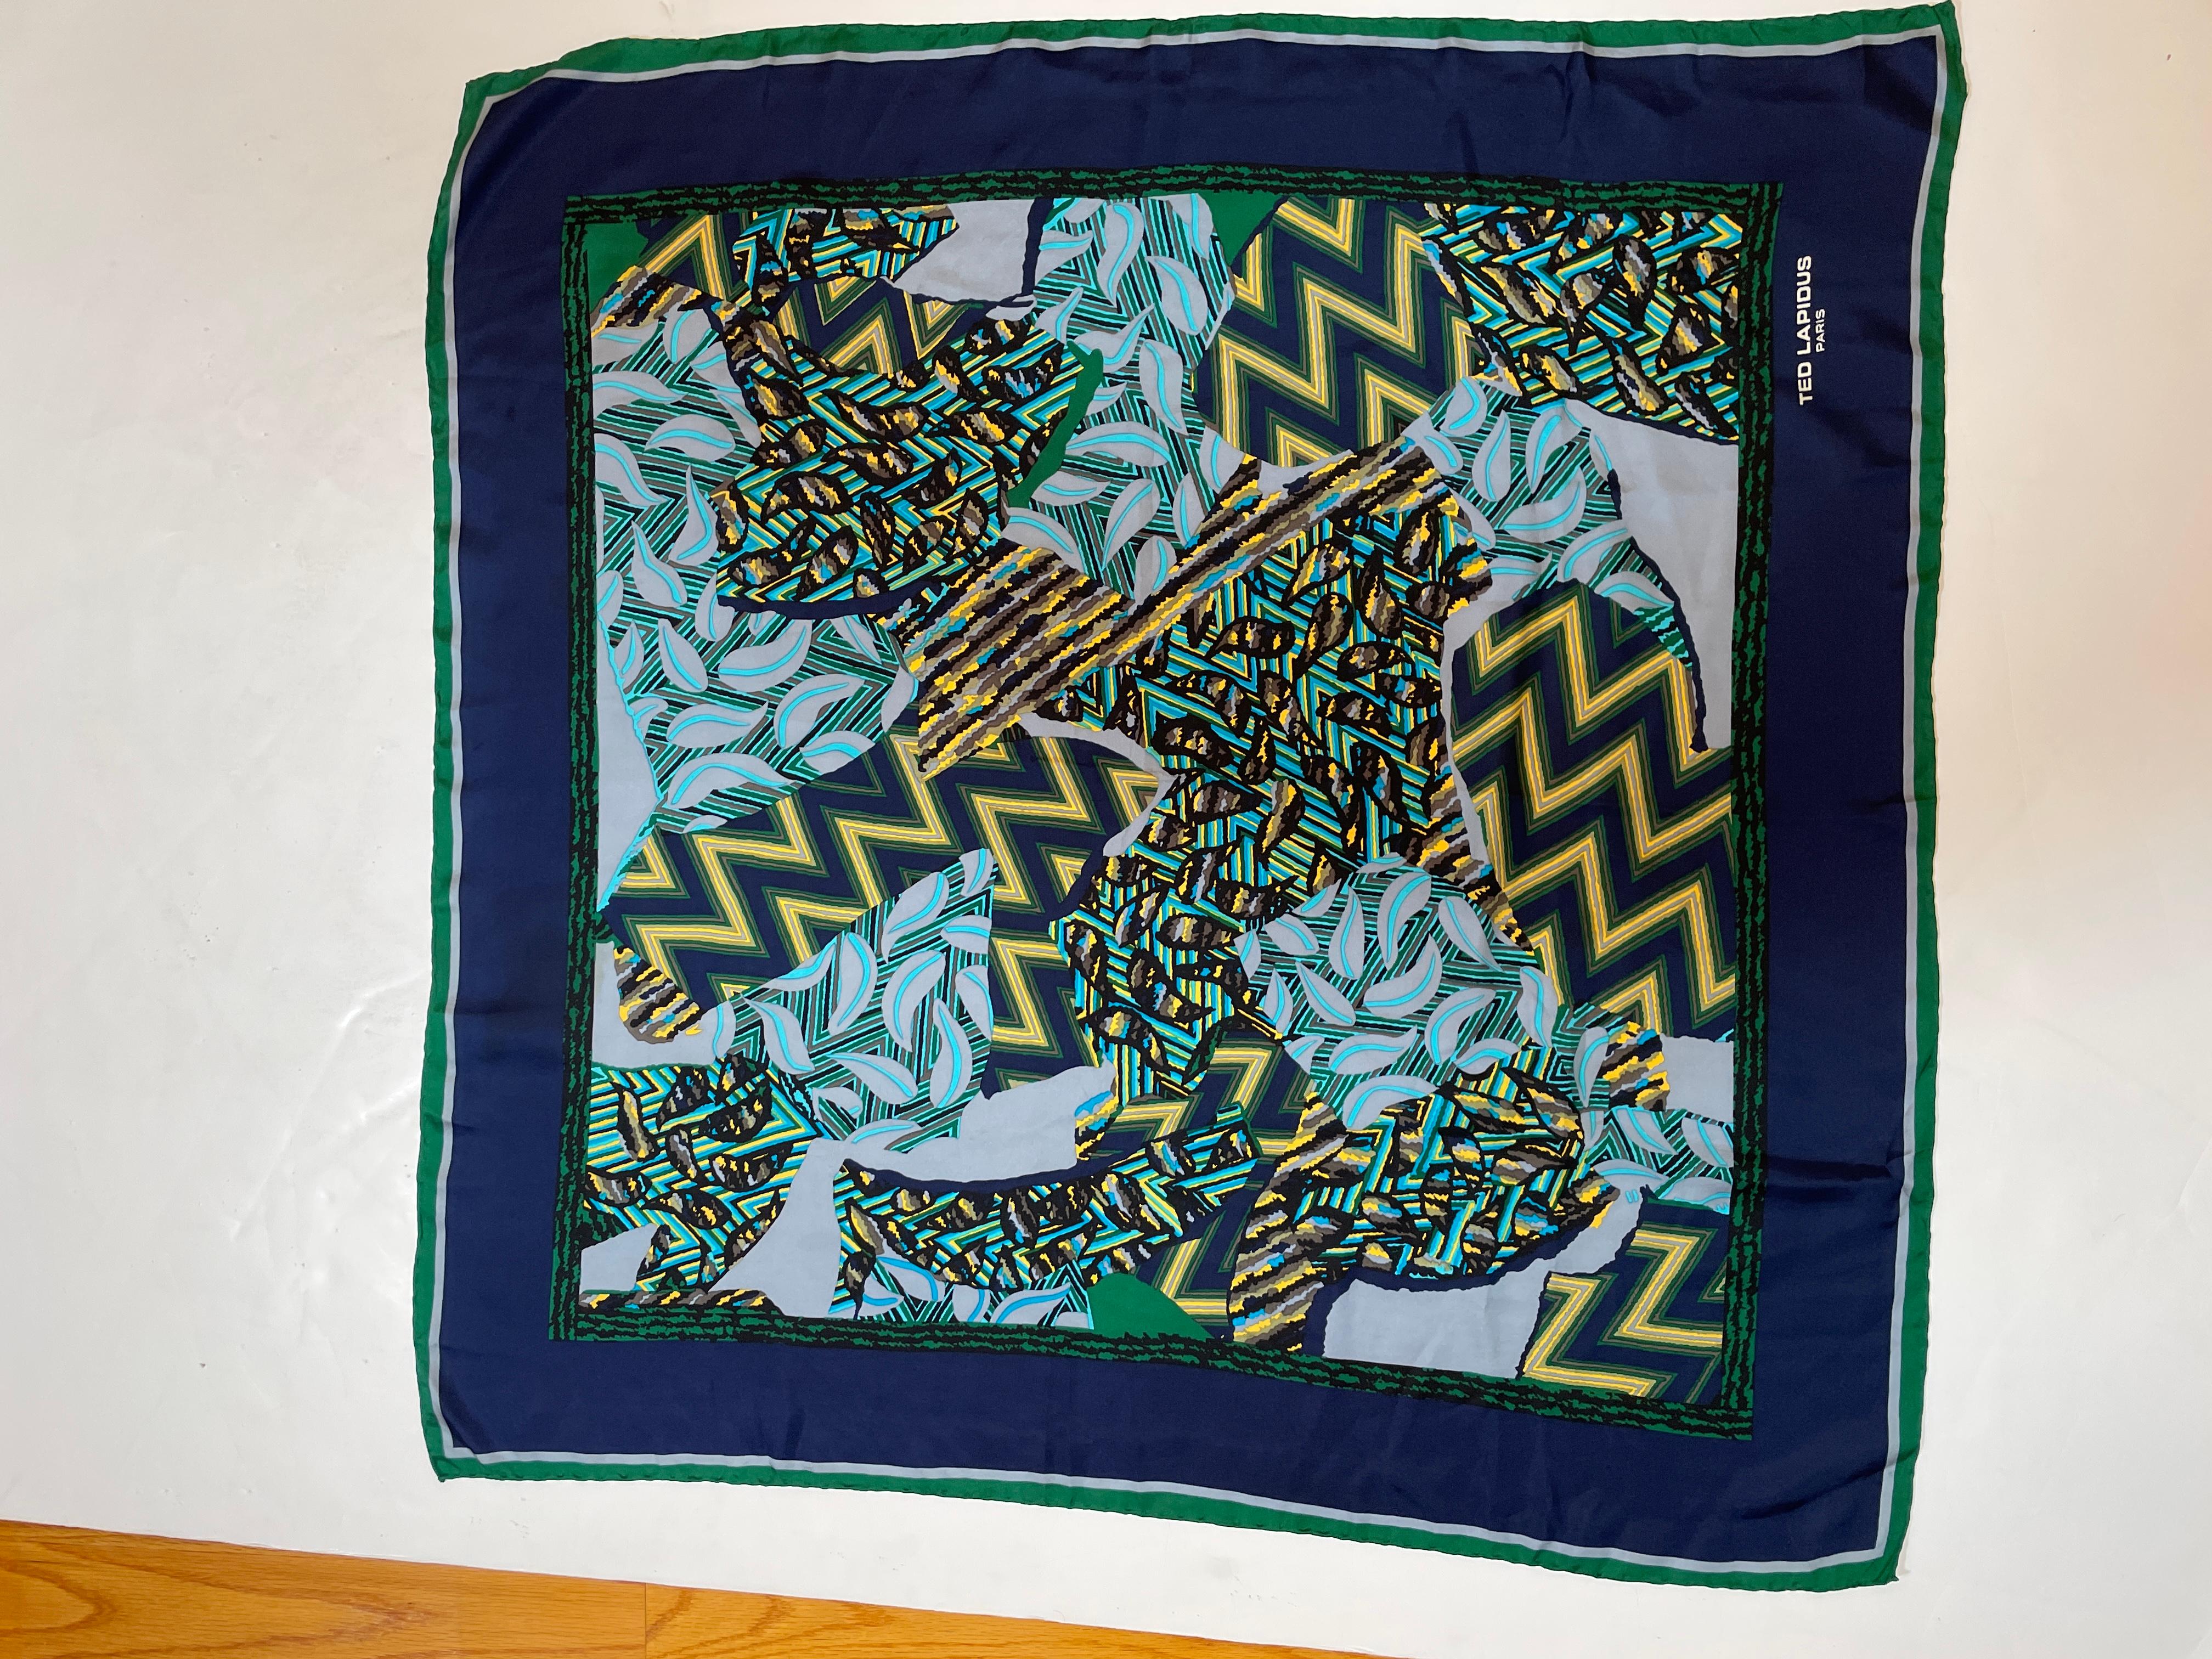 Gorgeous Ted Lapidus silk vintage scarf in blue and emerald green tones with geometric designs and hand rolled edges.
Made in France Circa 1970’s.
Large size: 34.5 x 34.5 inches.
About: 
Edmond 